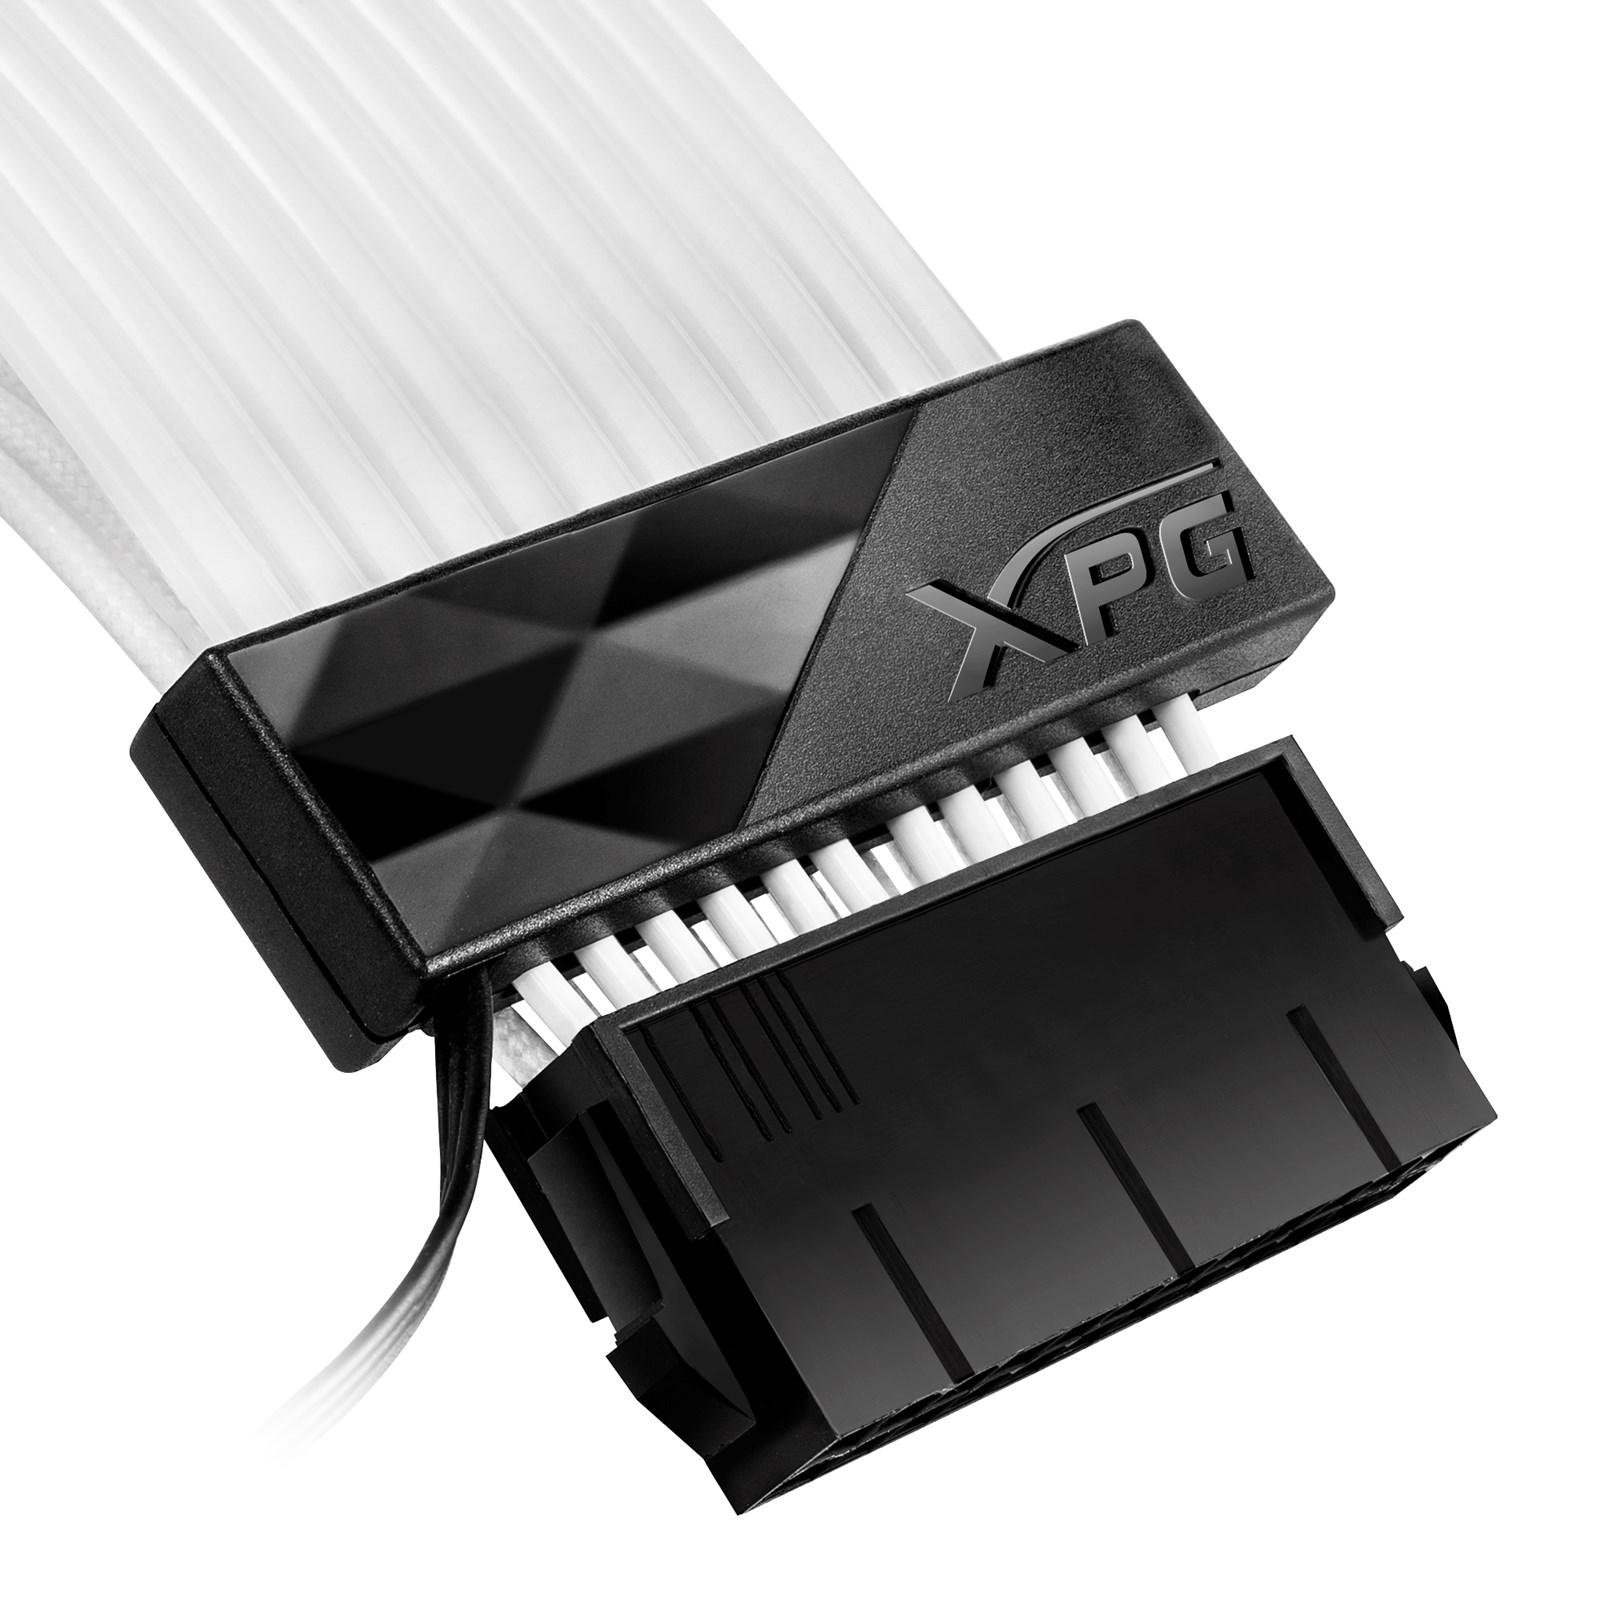 Adata Xpg Prime Argb Extension Cable For 24 Pin Atx Motherboard Cable